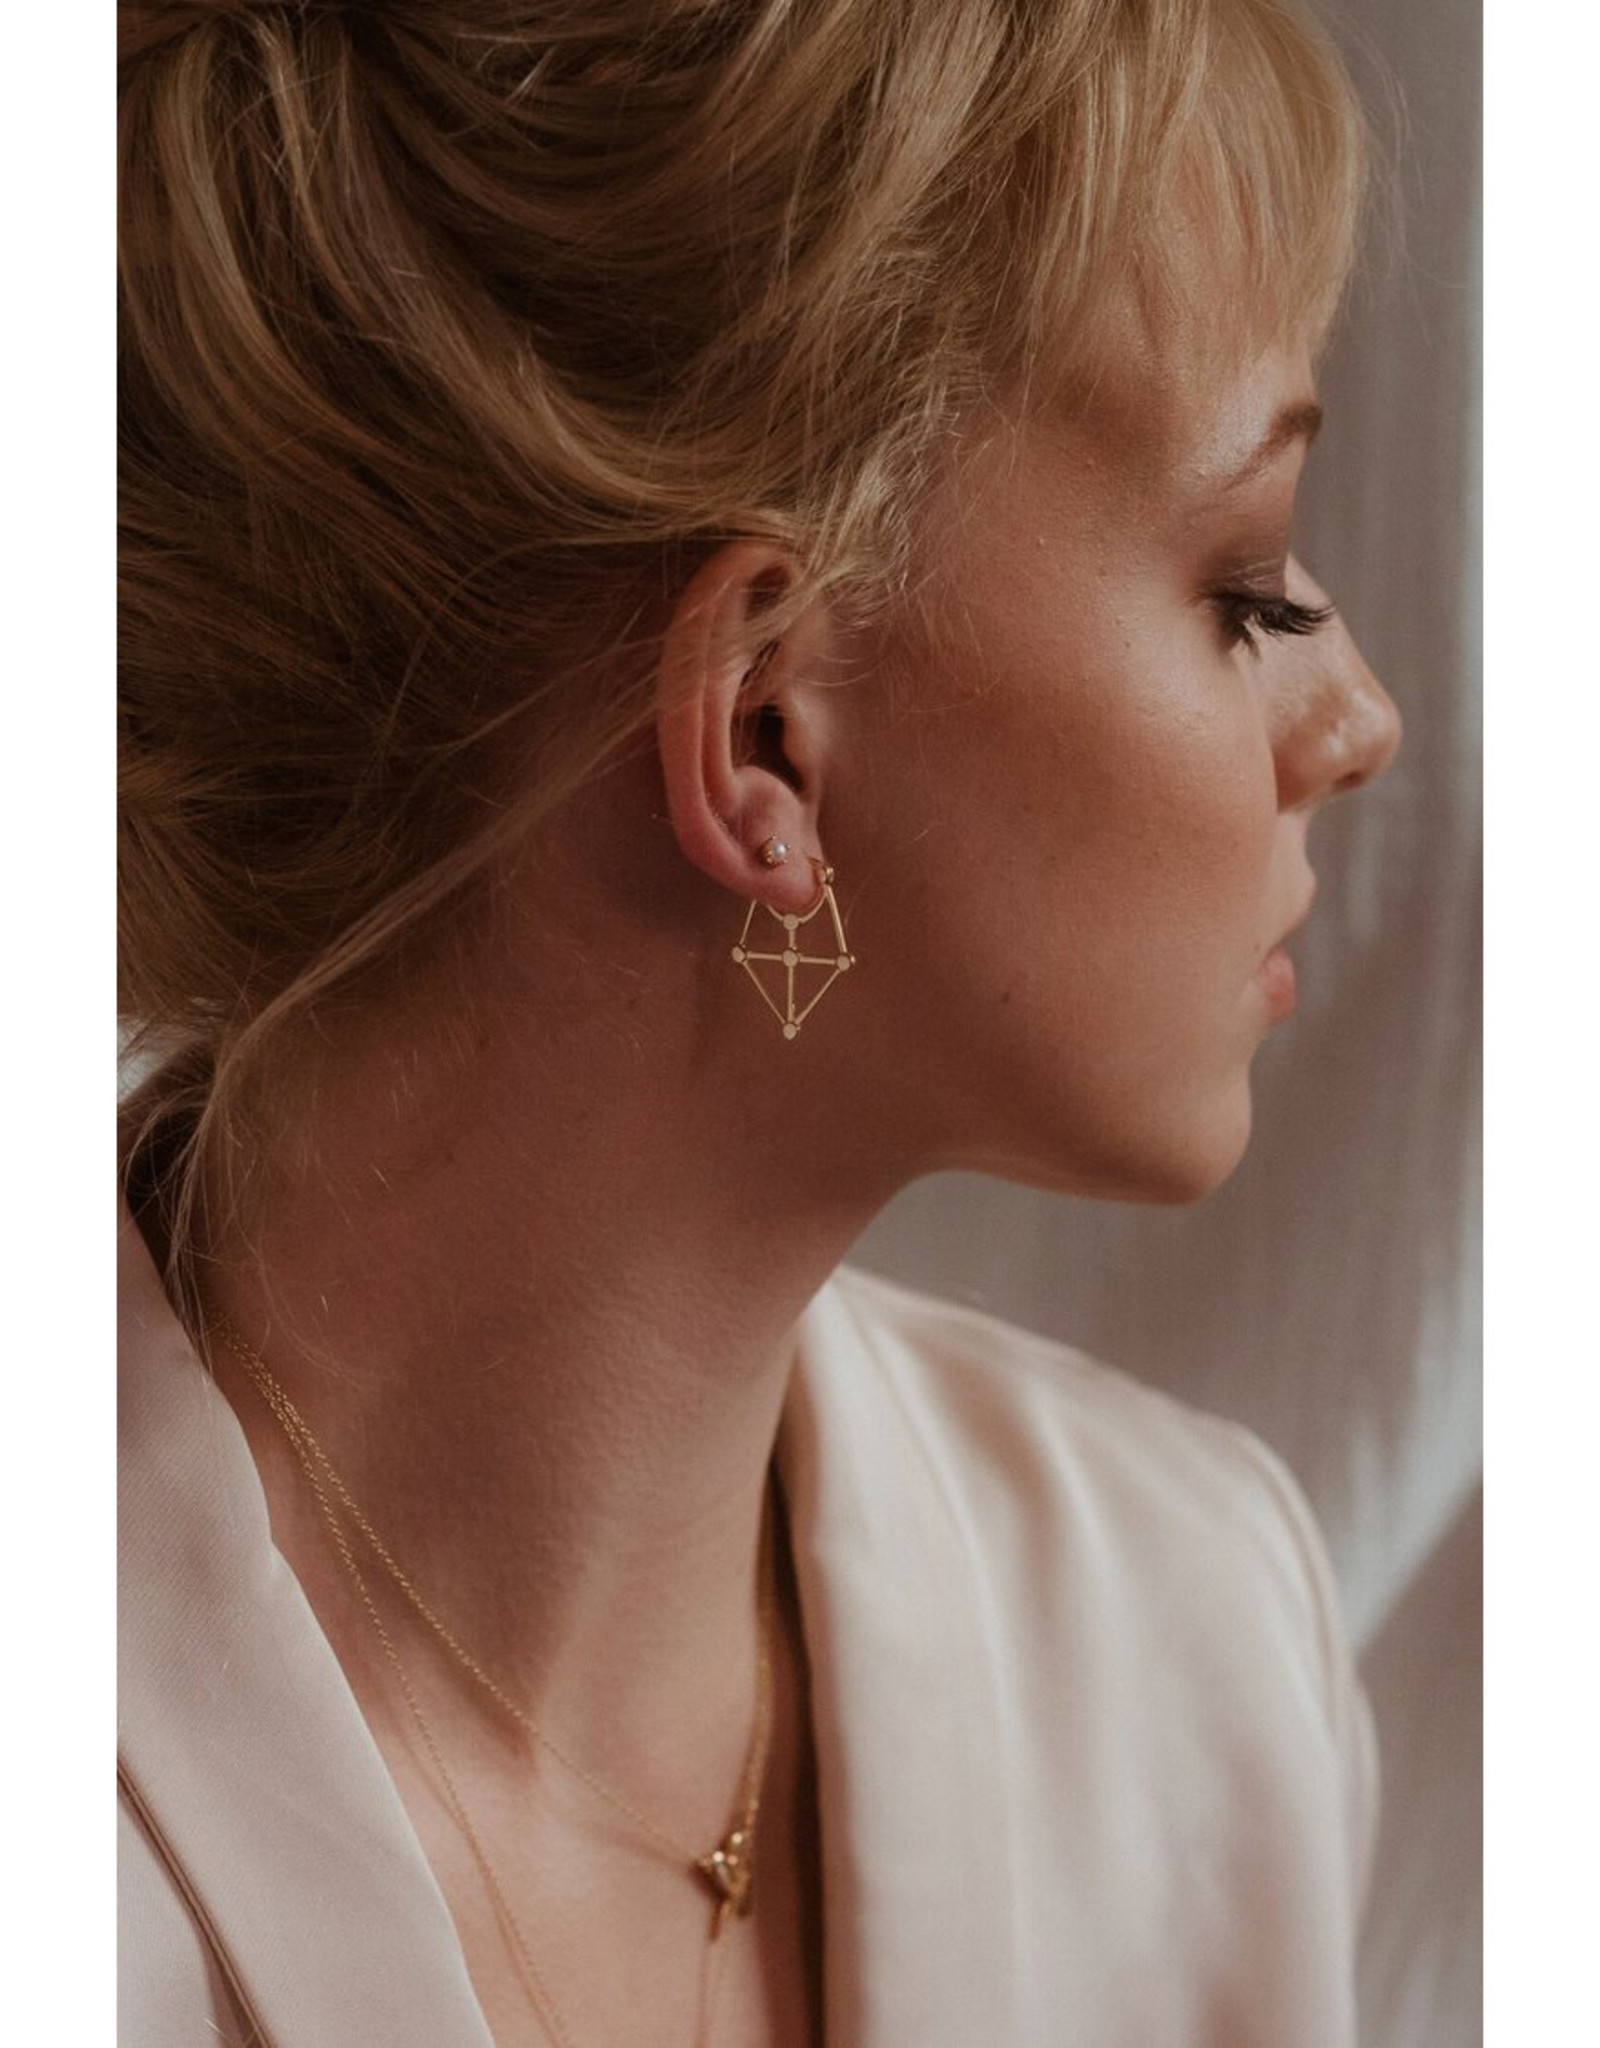 Sarah Mulder Jewelry Carice Earrings - Gold